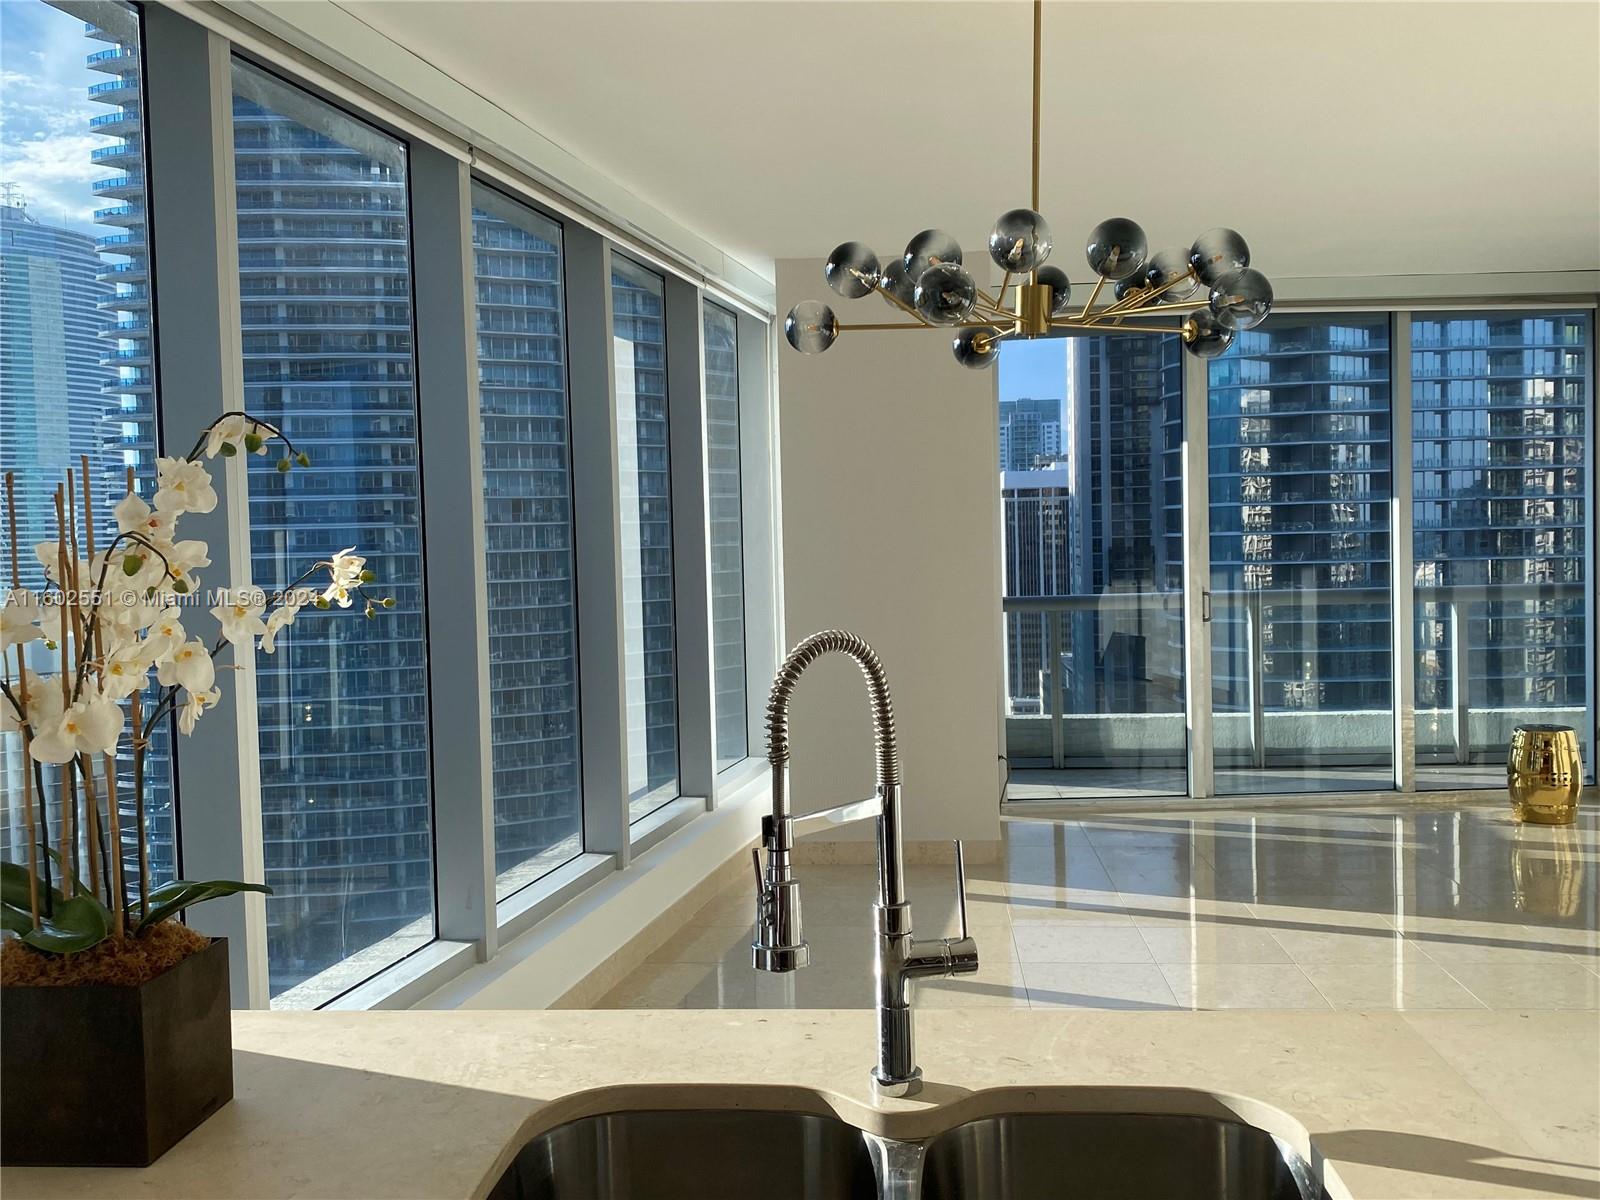 AMAZING 2BR/2BA CORNER UNIT AT ICON BRICKELL. CUSTOM DESIGNER LIGHTING, ENDLESS VIEWS OF MIAMI RIVER AND BISCAYNE BAY. WOLF AND SUBZERO APPLIANCES. STATE OF THE ART FITNESS CENTER- 5STAR AMENITIES. CIPRIANI'S, CANTINA VEINTE & ADDIKT ALL ON PREMISE. WALKING DISTANCE TO BRICKELL CITY CENTER, ENDLESS RESTAURANTS AND BRICKELL FINANCIAL DISTRICT.